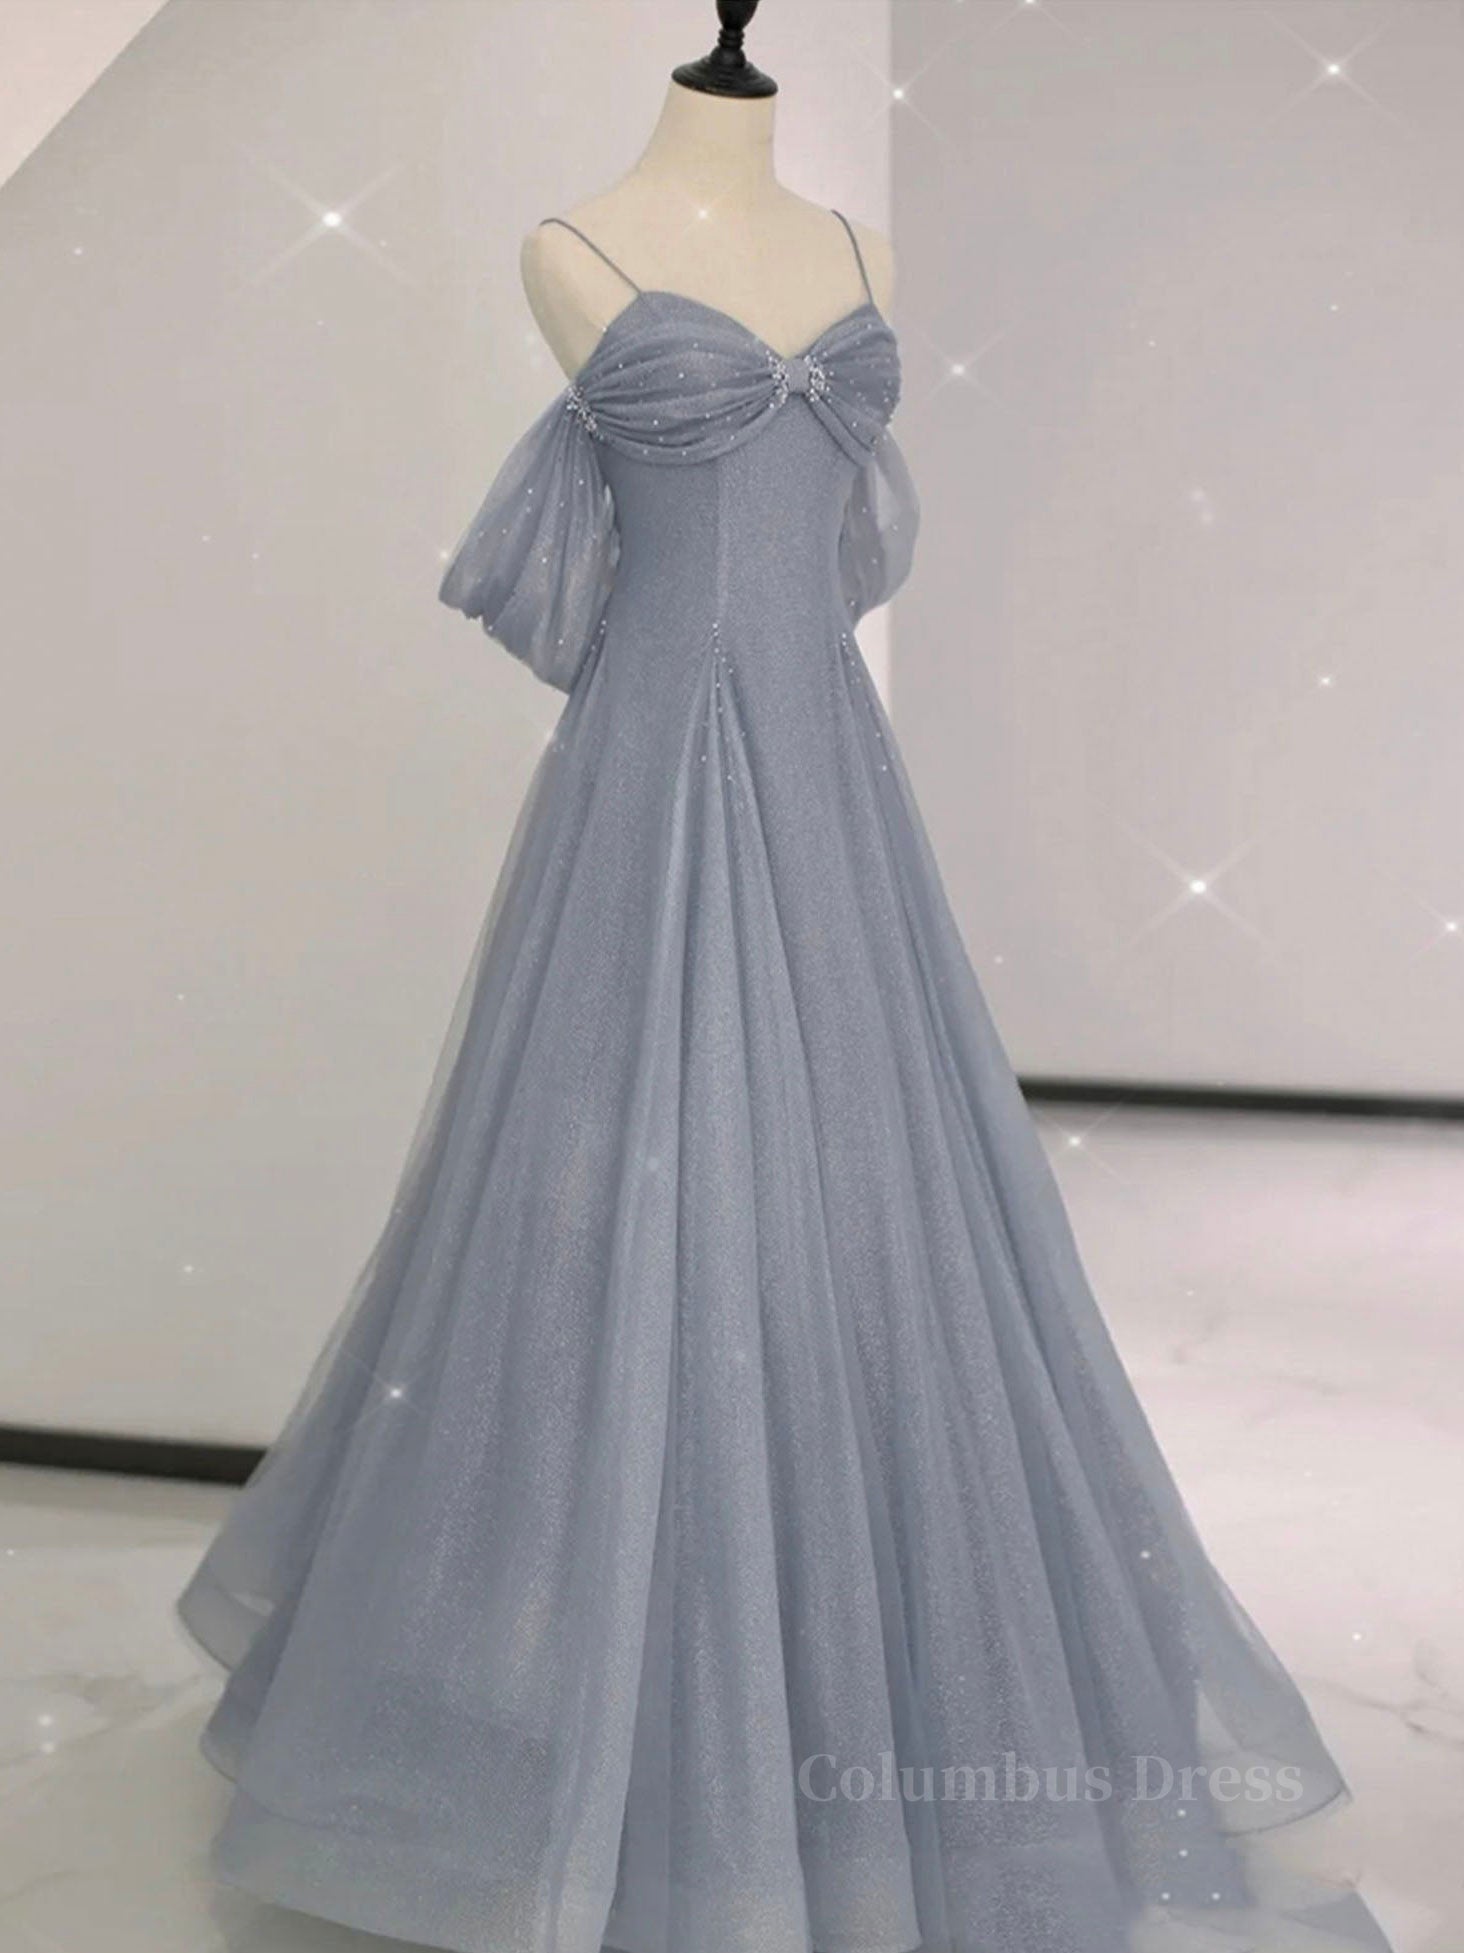 Prom Dress 2021, Gray A line tulle off shoulder prom dress, gray long evening dress